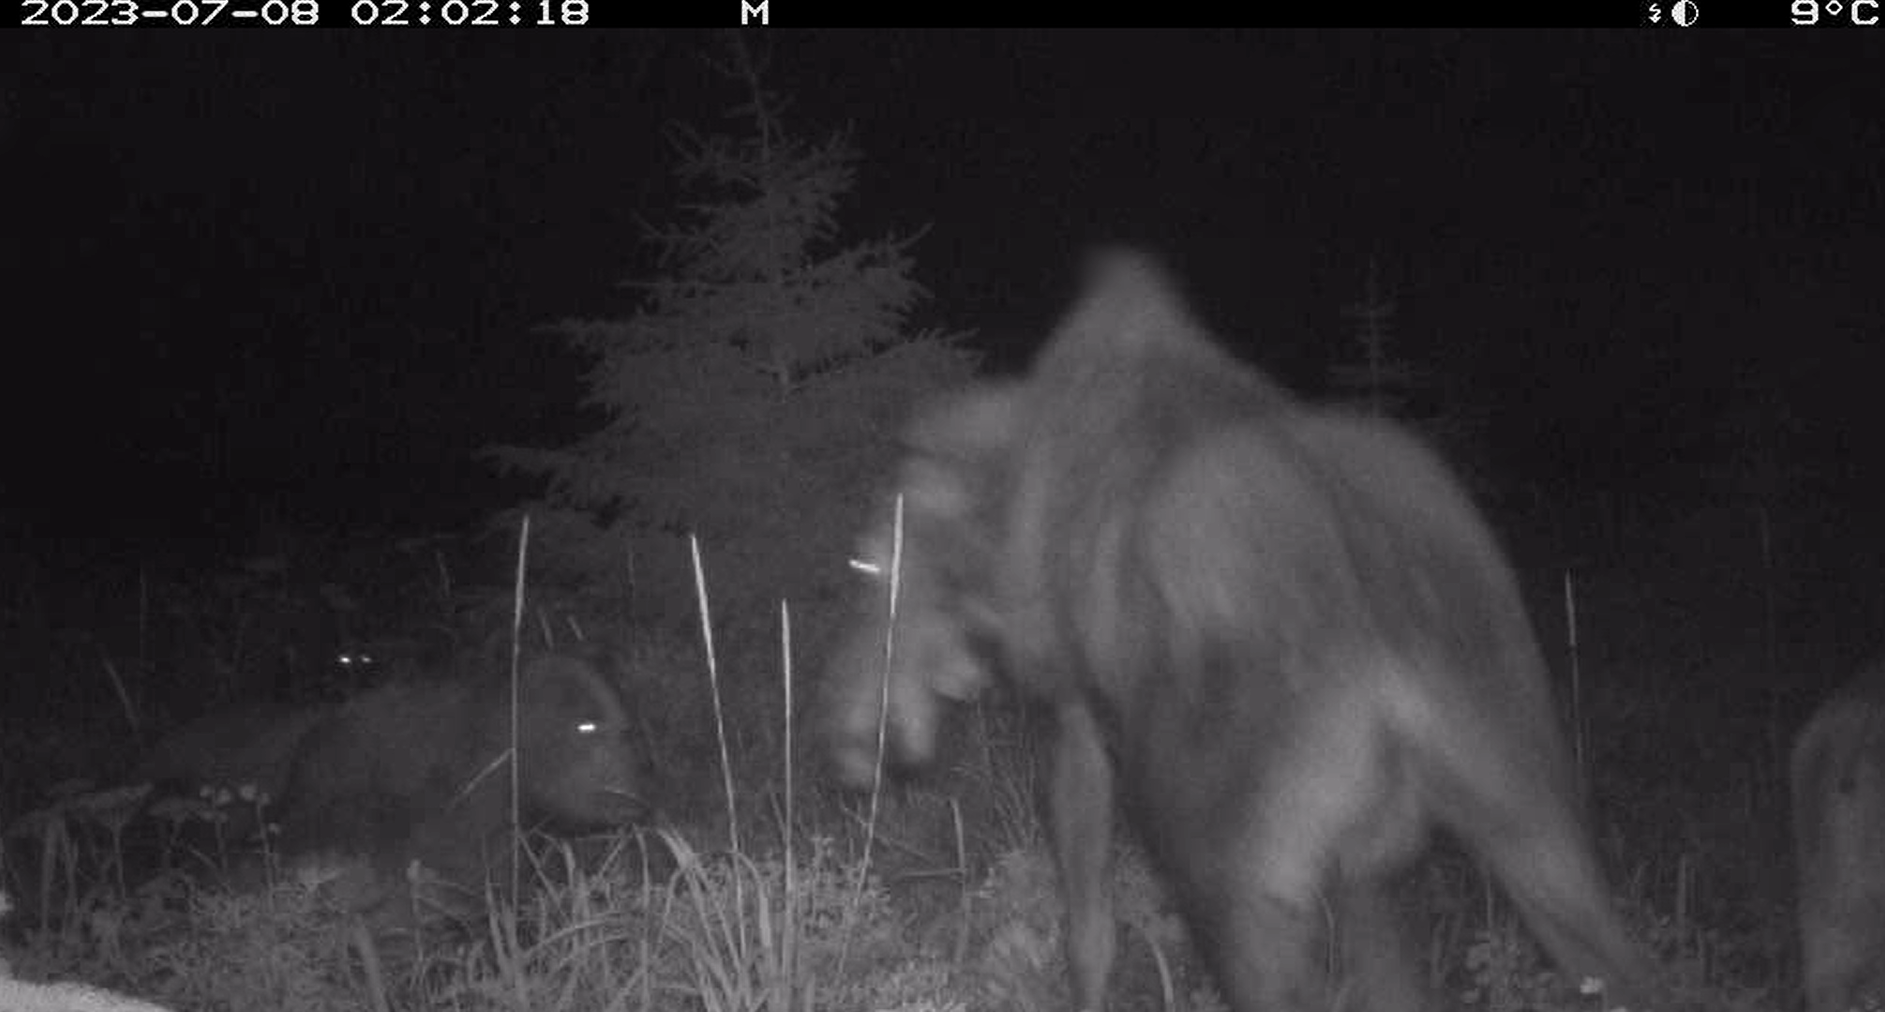 Brown Bear and Wolf Team Up to Attack Moose and Calf in Shocking Video